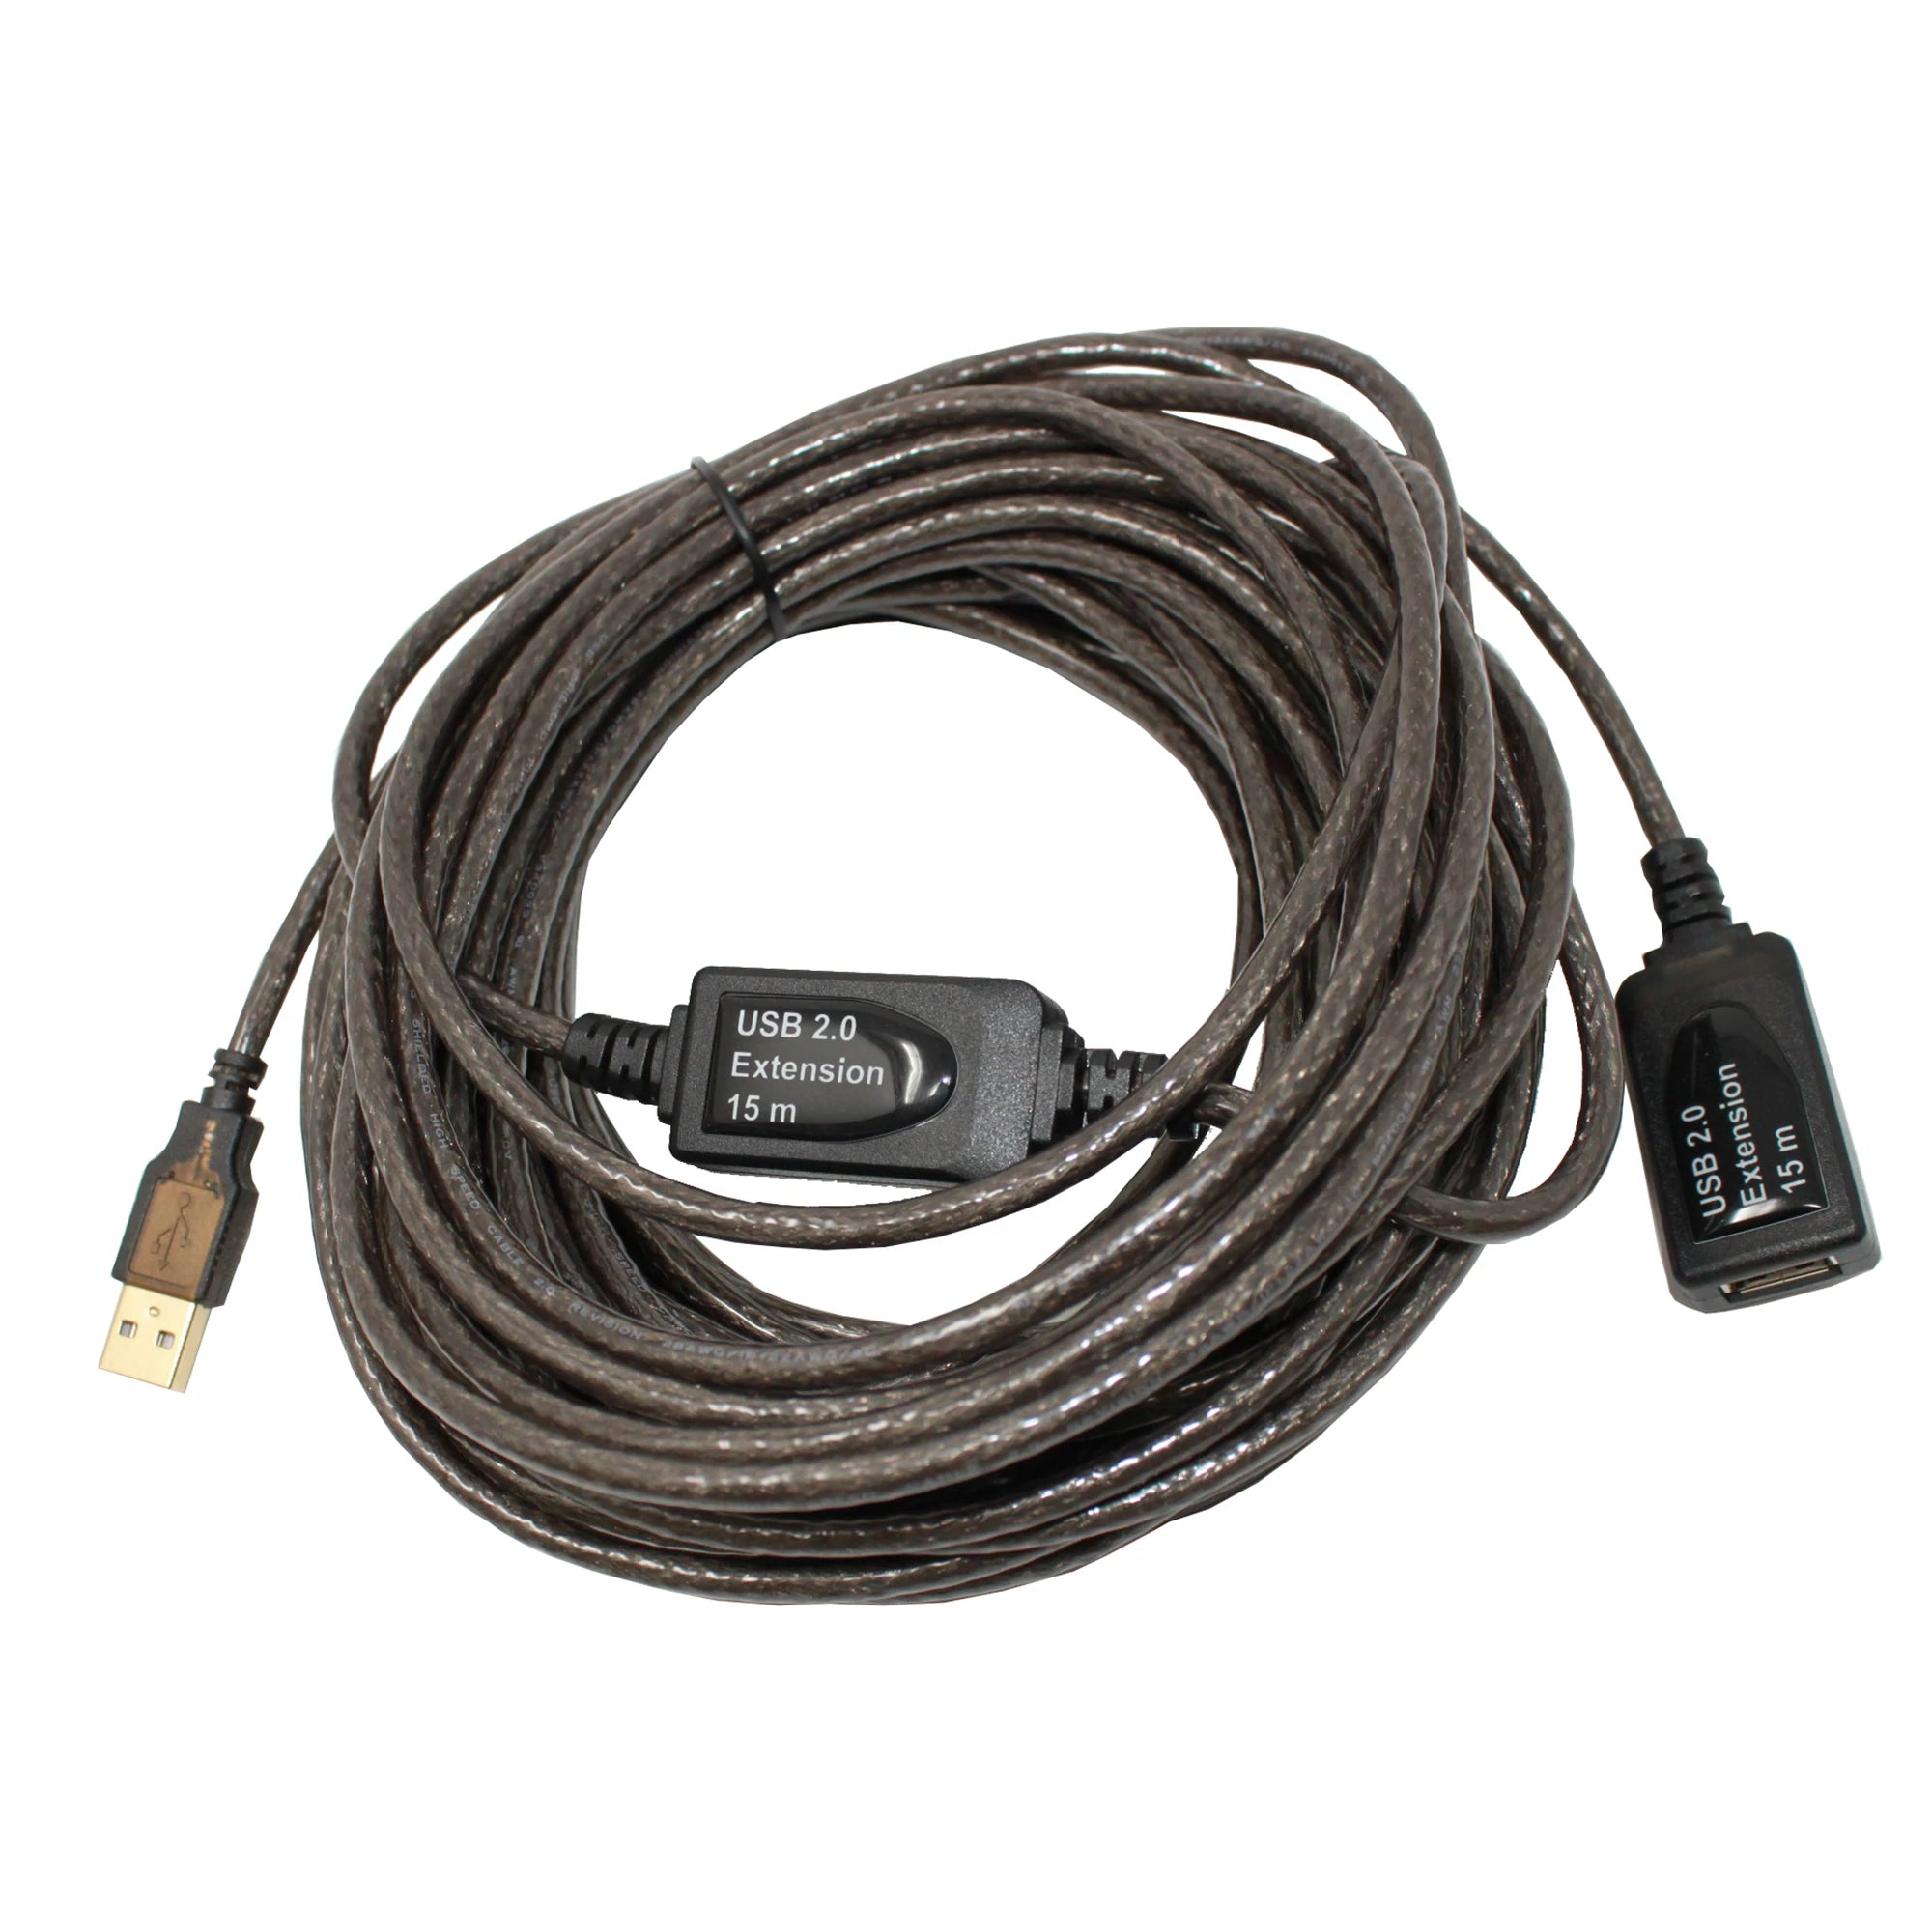 USB 2.0 Cable for Smart Coach Radar and Smart Display